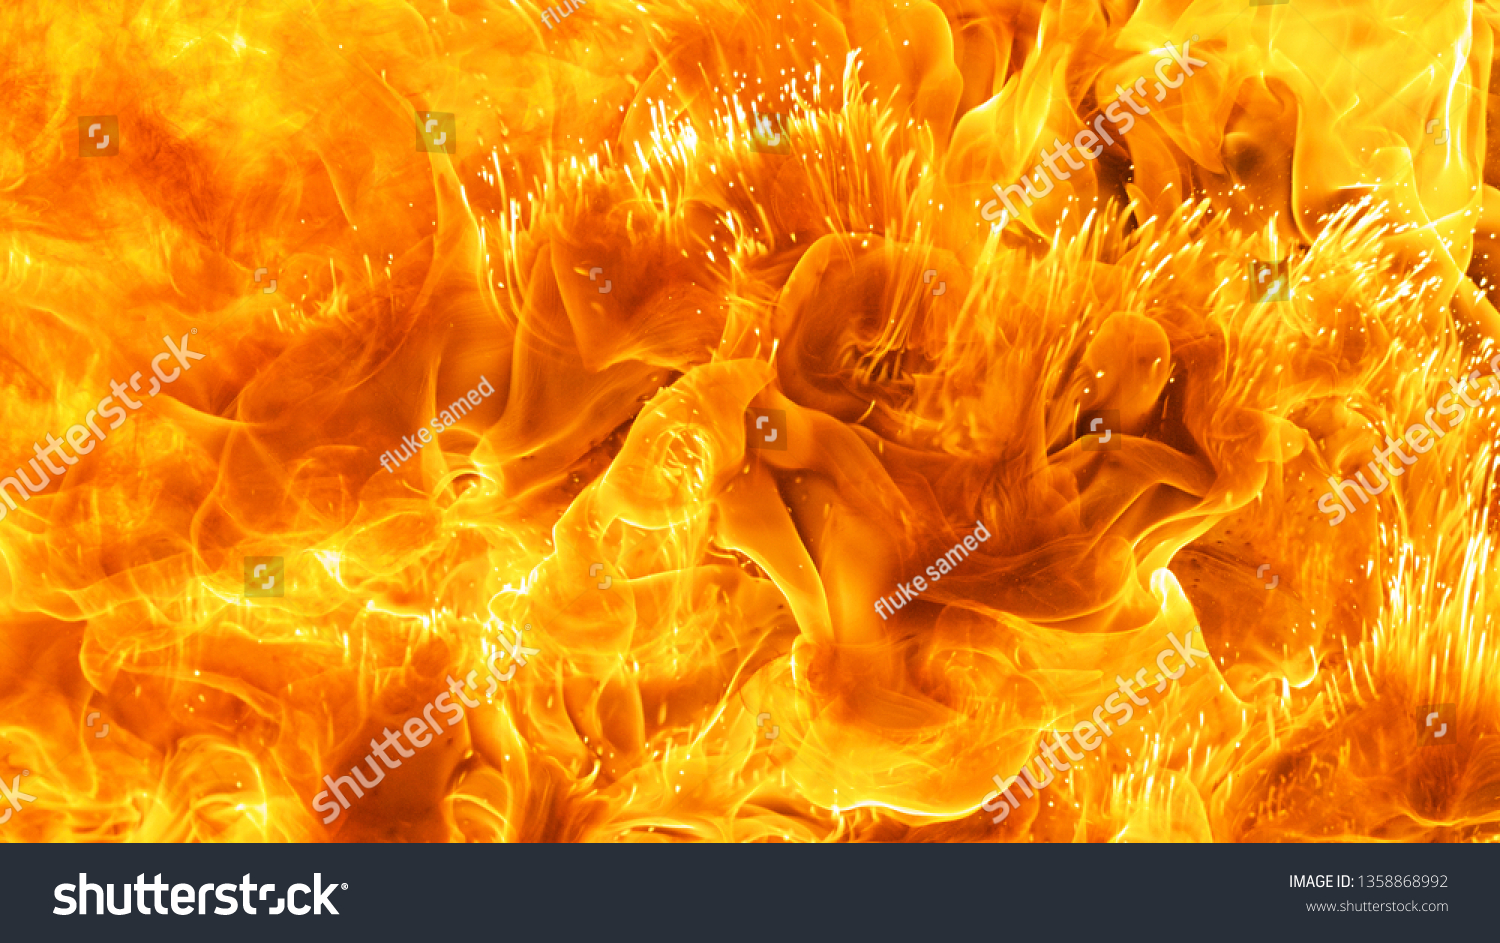 abstract blaze fire flame texture background #1358868992